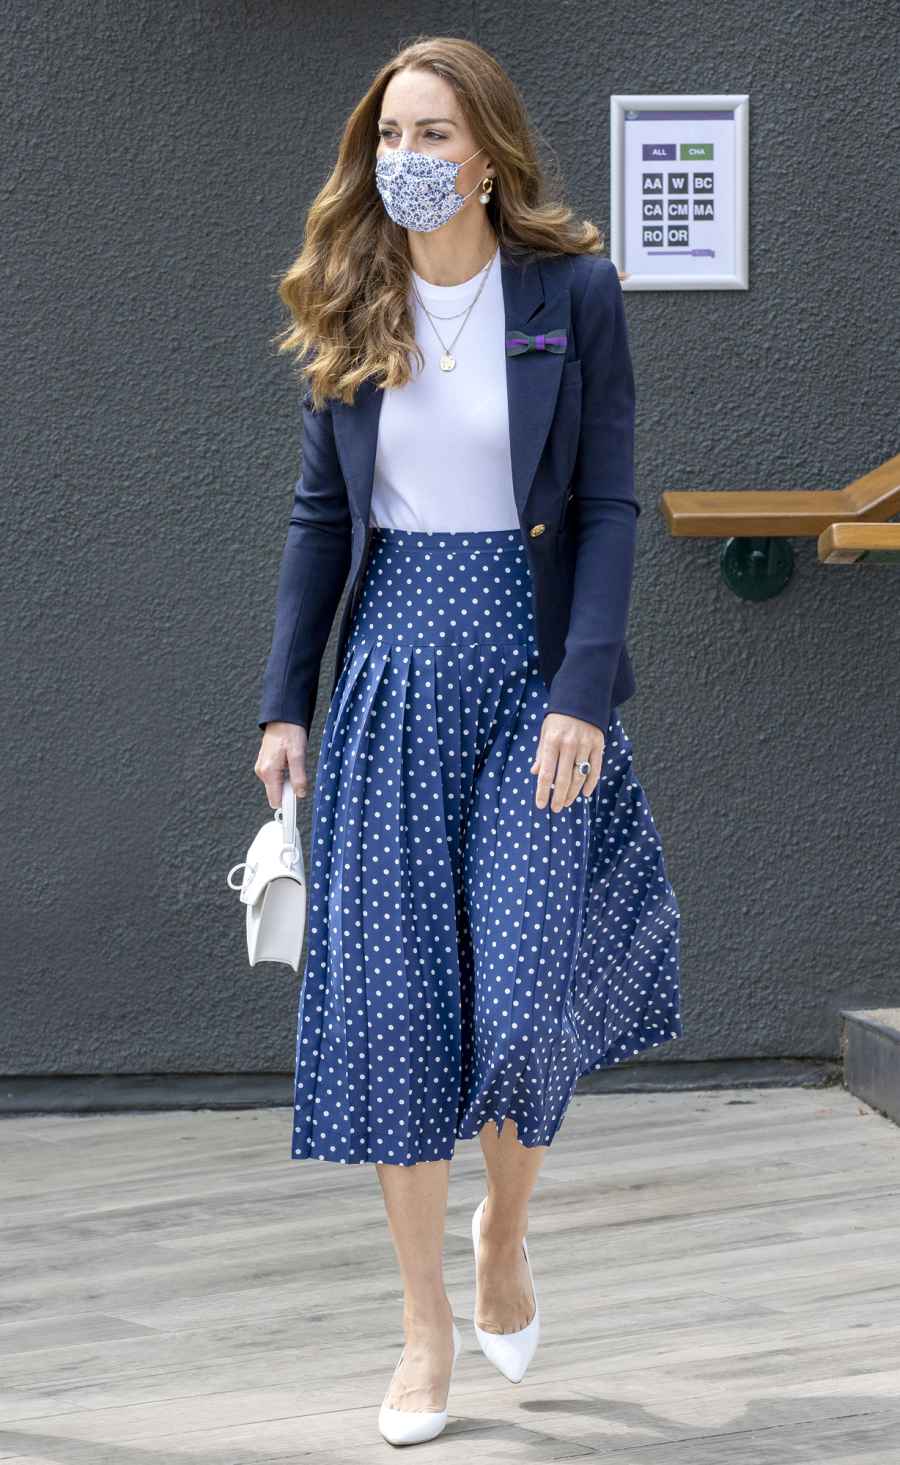 Kate Middleton style: Get the royal's polka dot look for less